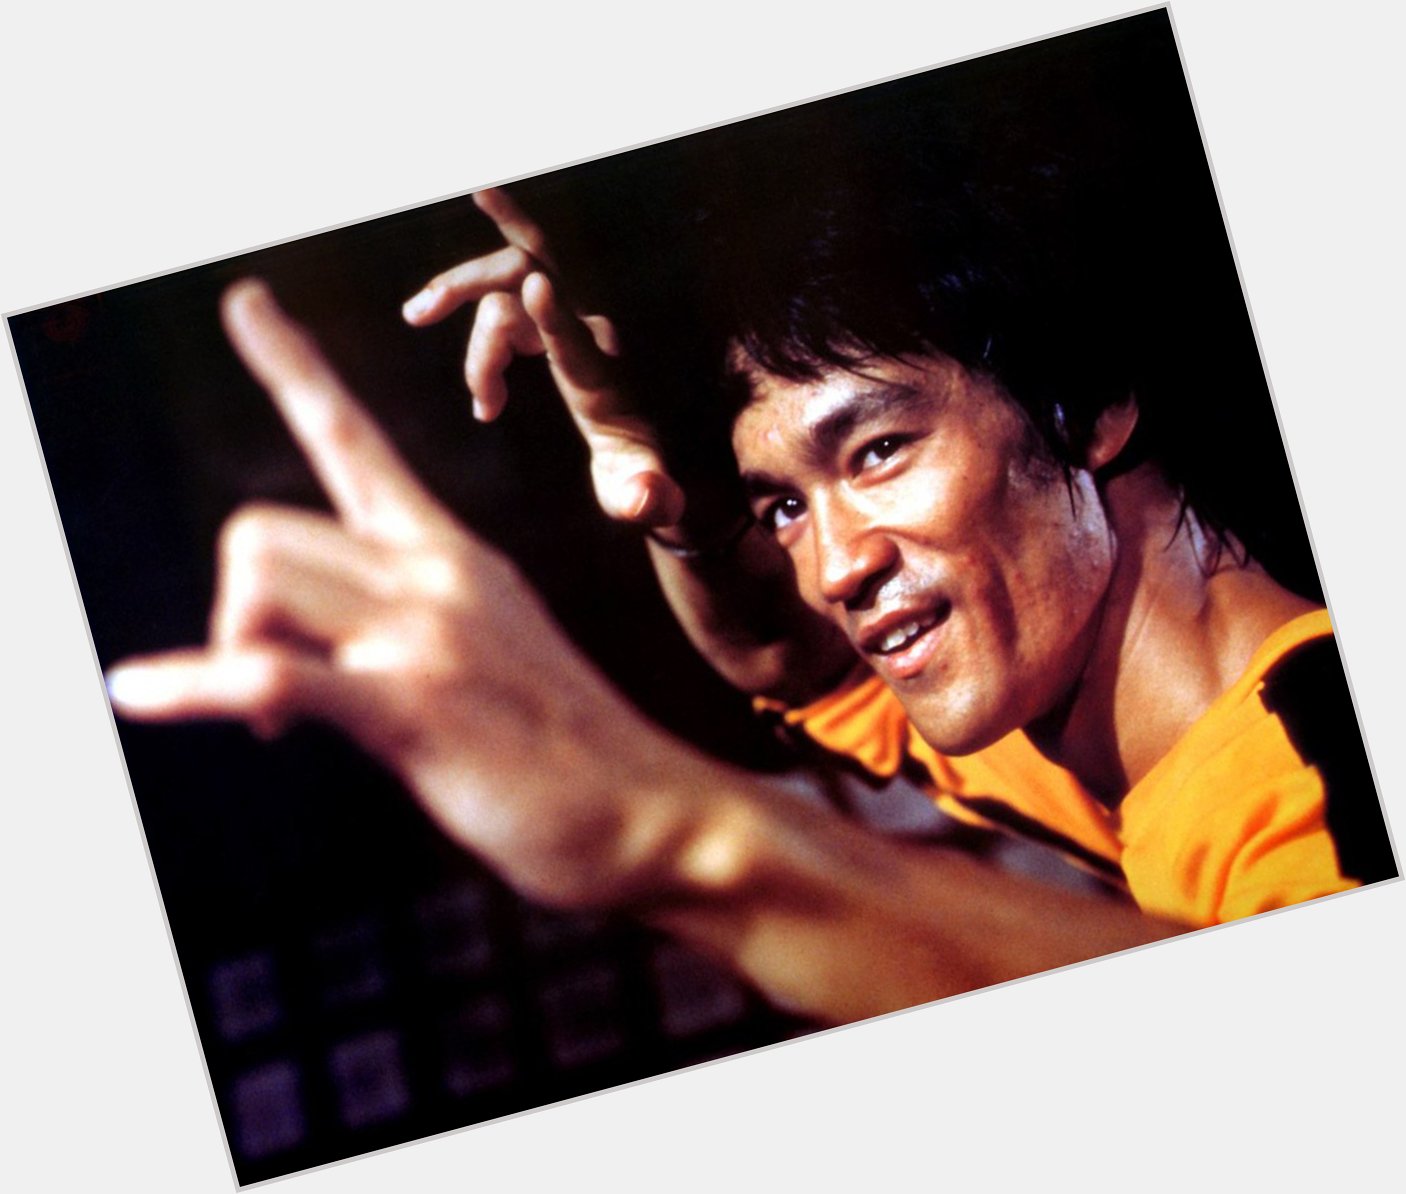 Happy Birthday to Bruce Lee, who would have turned 82 today. 